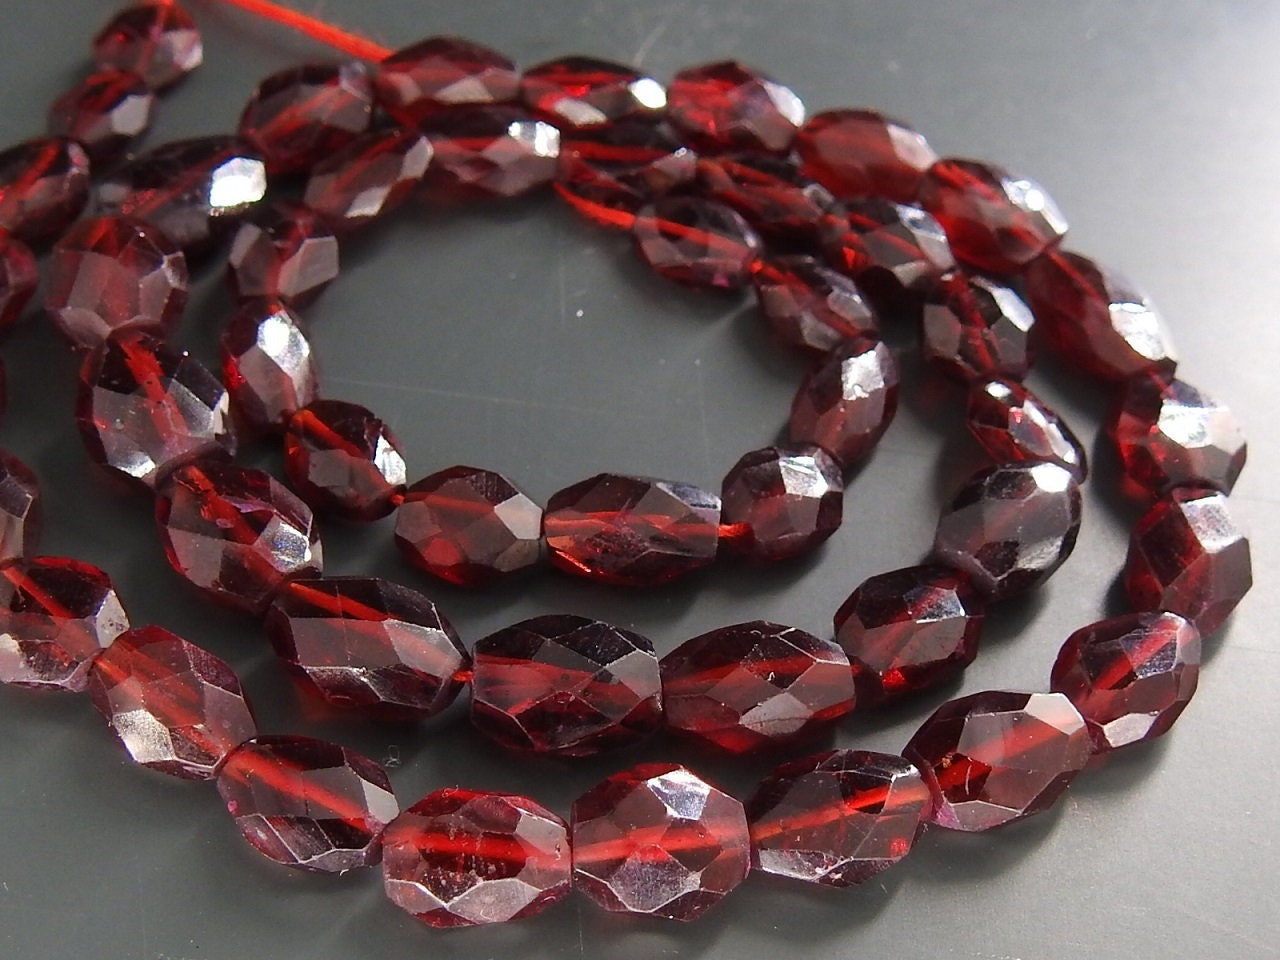 100%Natural Mozambique Garnet Faceted Tumble,Nugget,Loose Stone,Handmade,For Jewelry Making 16Inch Strand 10X7To5X4 MM Approx PMETU2 | Save 33% - Rajasthan Living 20